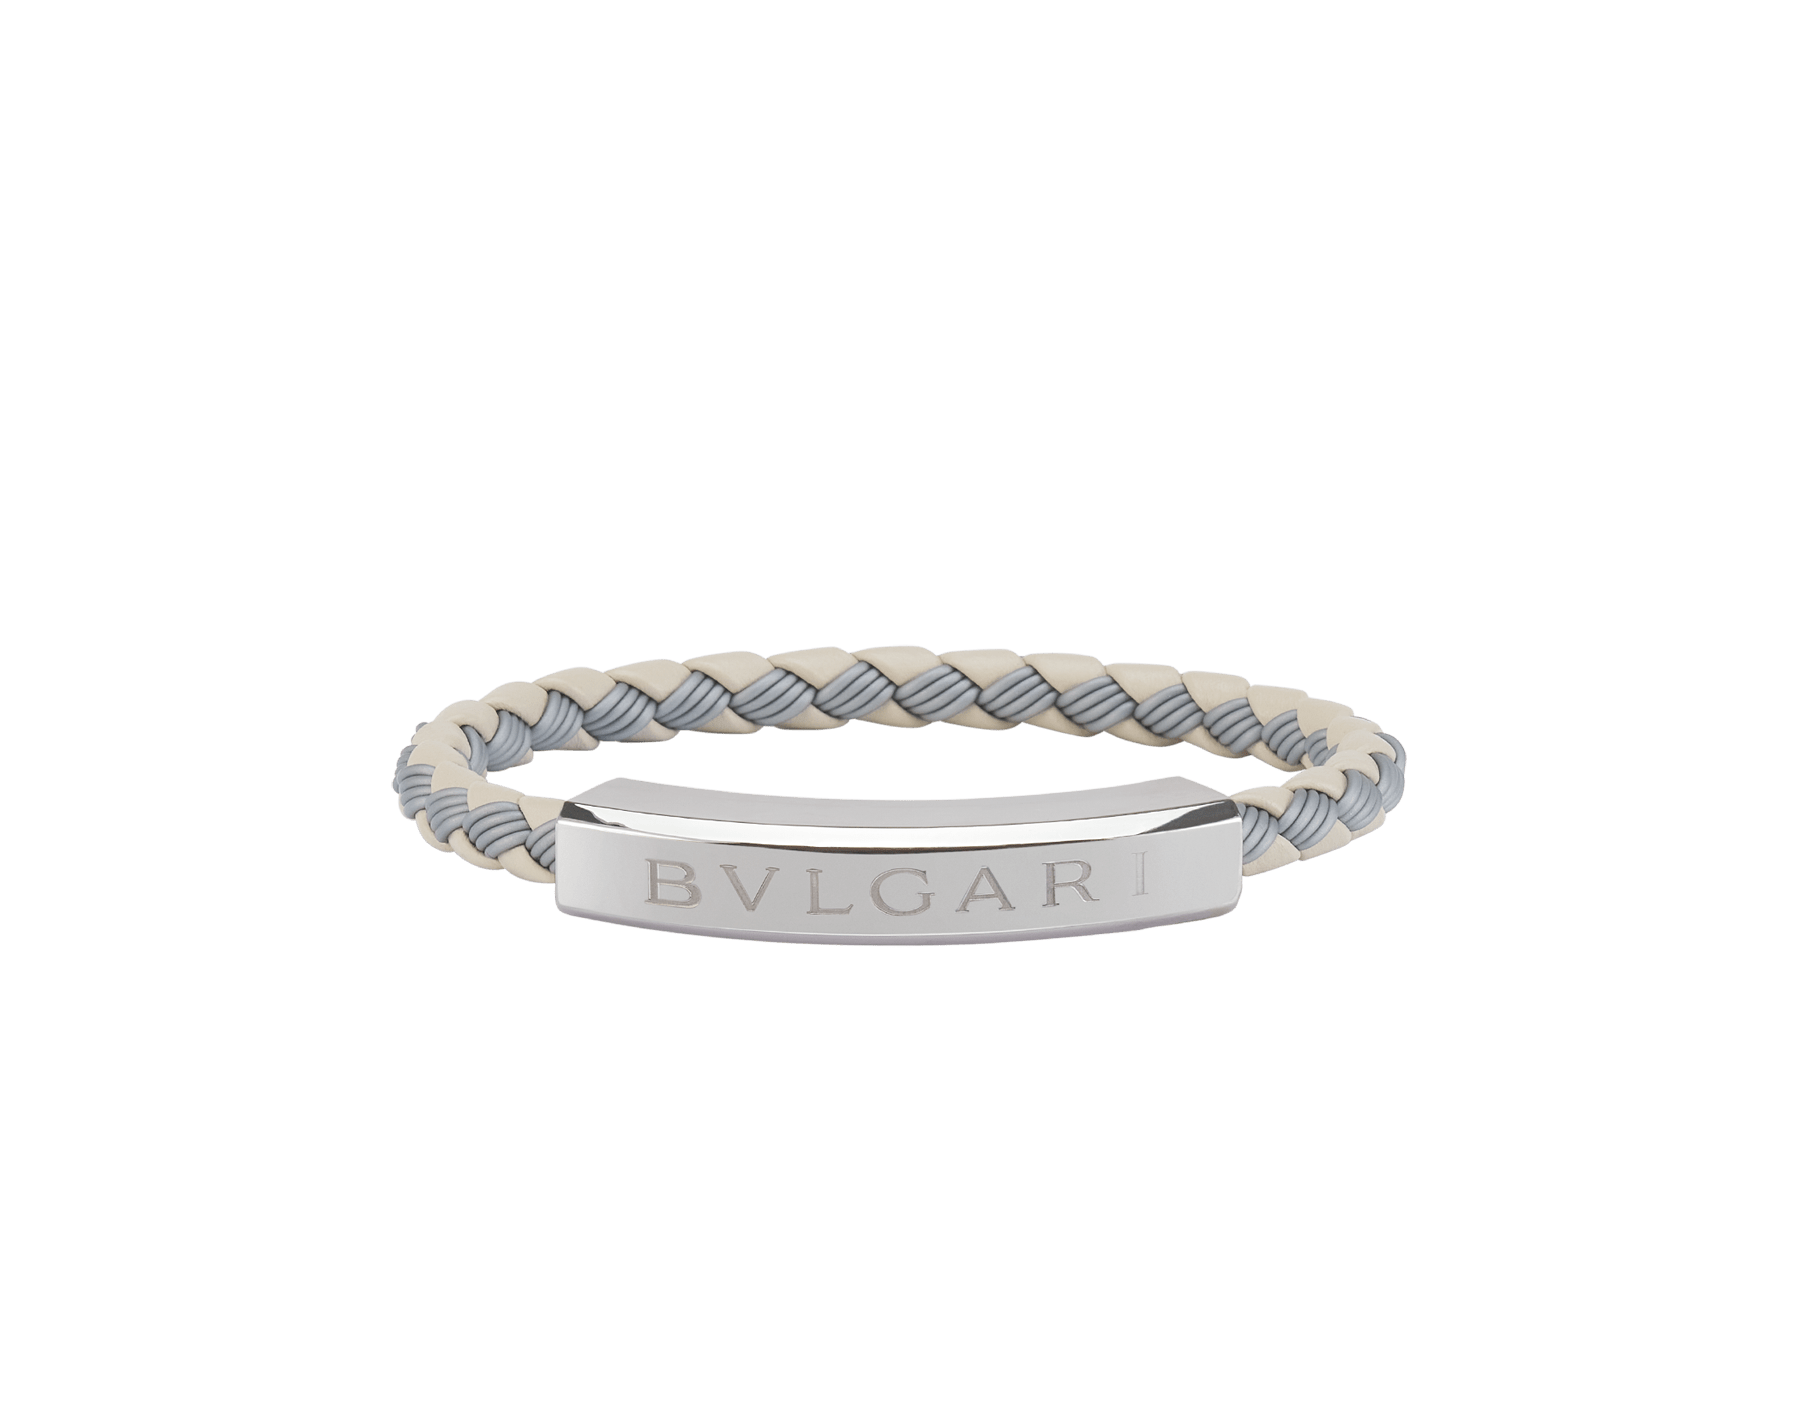 BULGARI BULGARI Man bracelet in moonbeam pearl light grey braided calf leather and rubber. Silver front clasp engraved with the iconic BULGARI logo. BBMLOGOPLATE-BCL-FO image 1